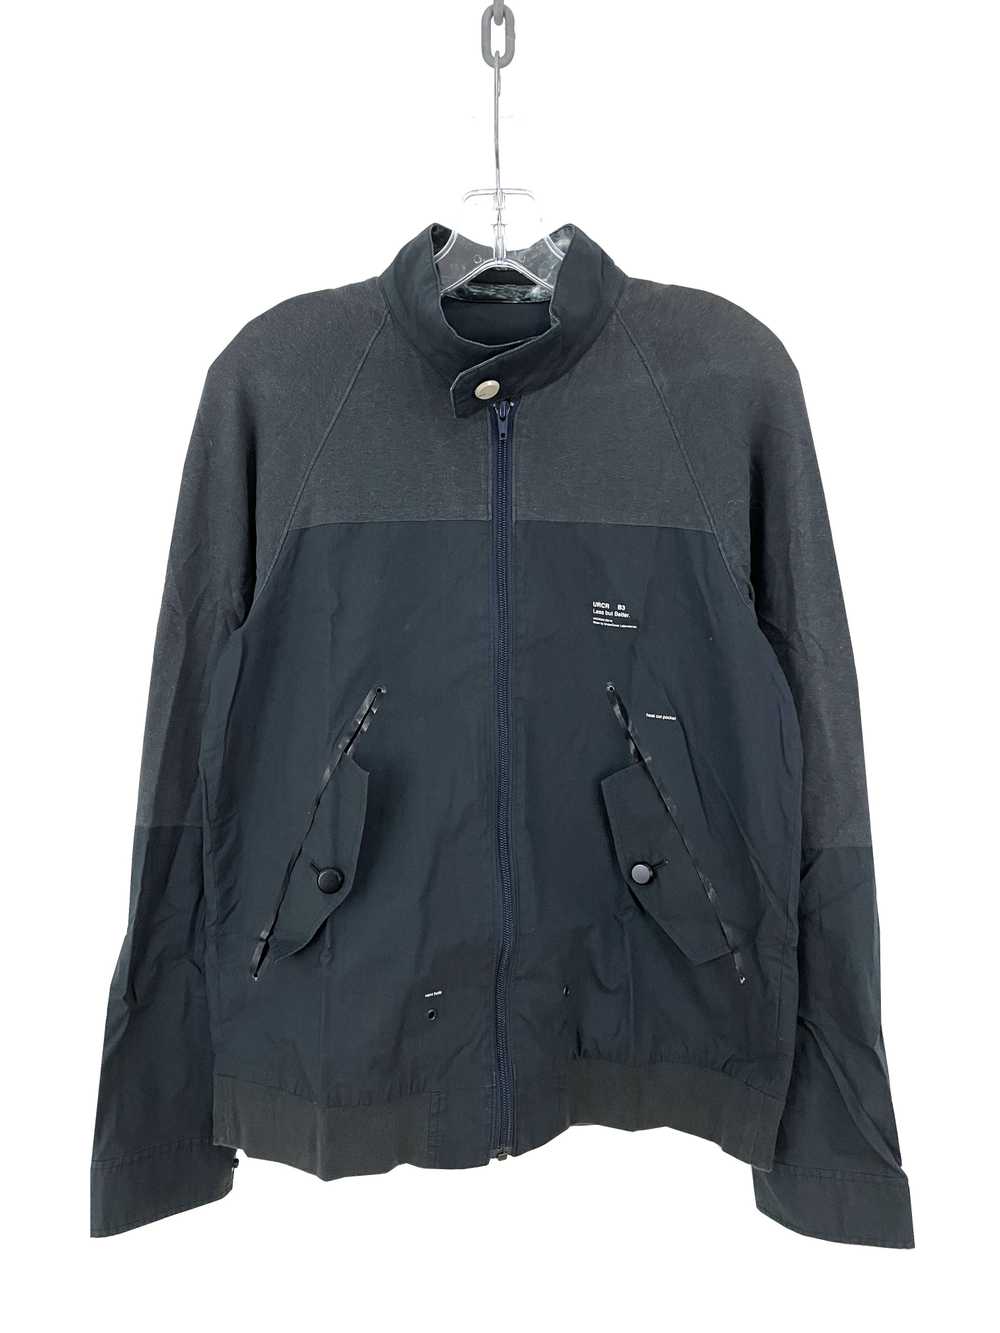 UNDERCOVER SS10 Less But Better Jacket - image 1